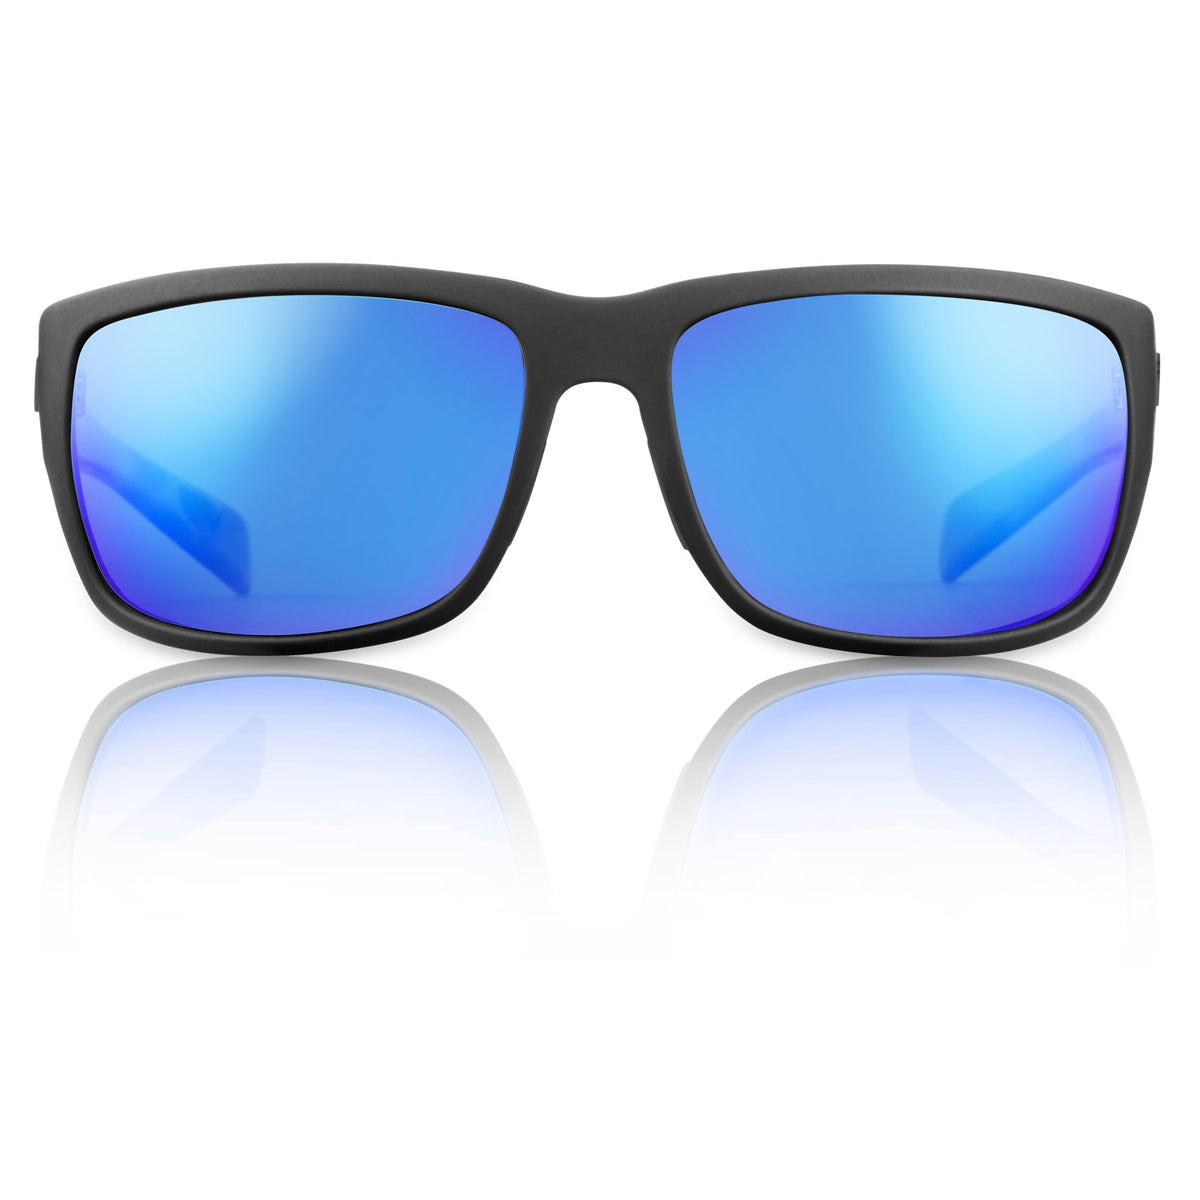 Don't Get Burned: Why Redfin Polarized Sunglasses are a Must-Have